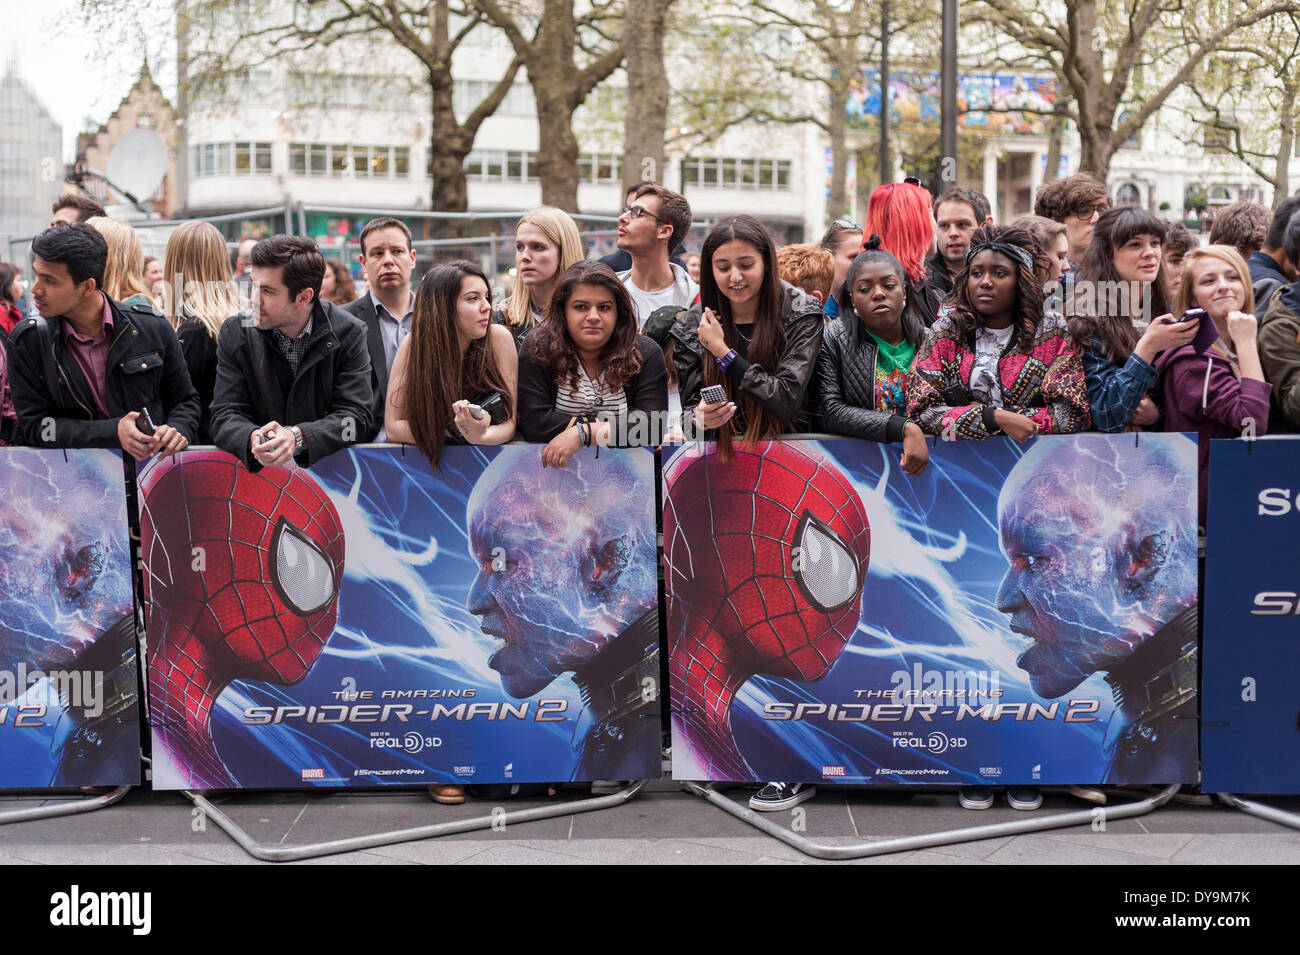 Leicester Square, London, UK, 10 April 2014.  Crowds gather to see the stars of 'The Amazing Spider-Man 2' movie which was having its world premiere. Credit:  Stephen Chung/Alamy Live News Stock Photo